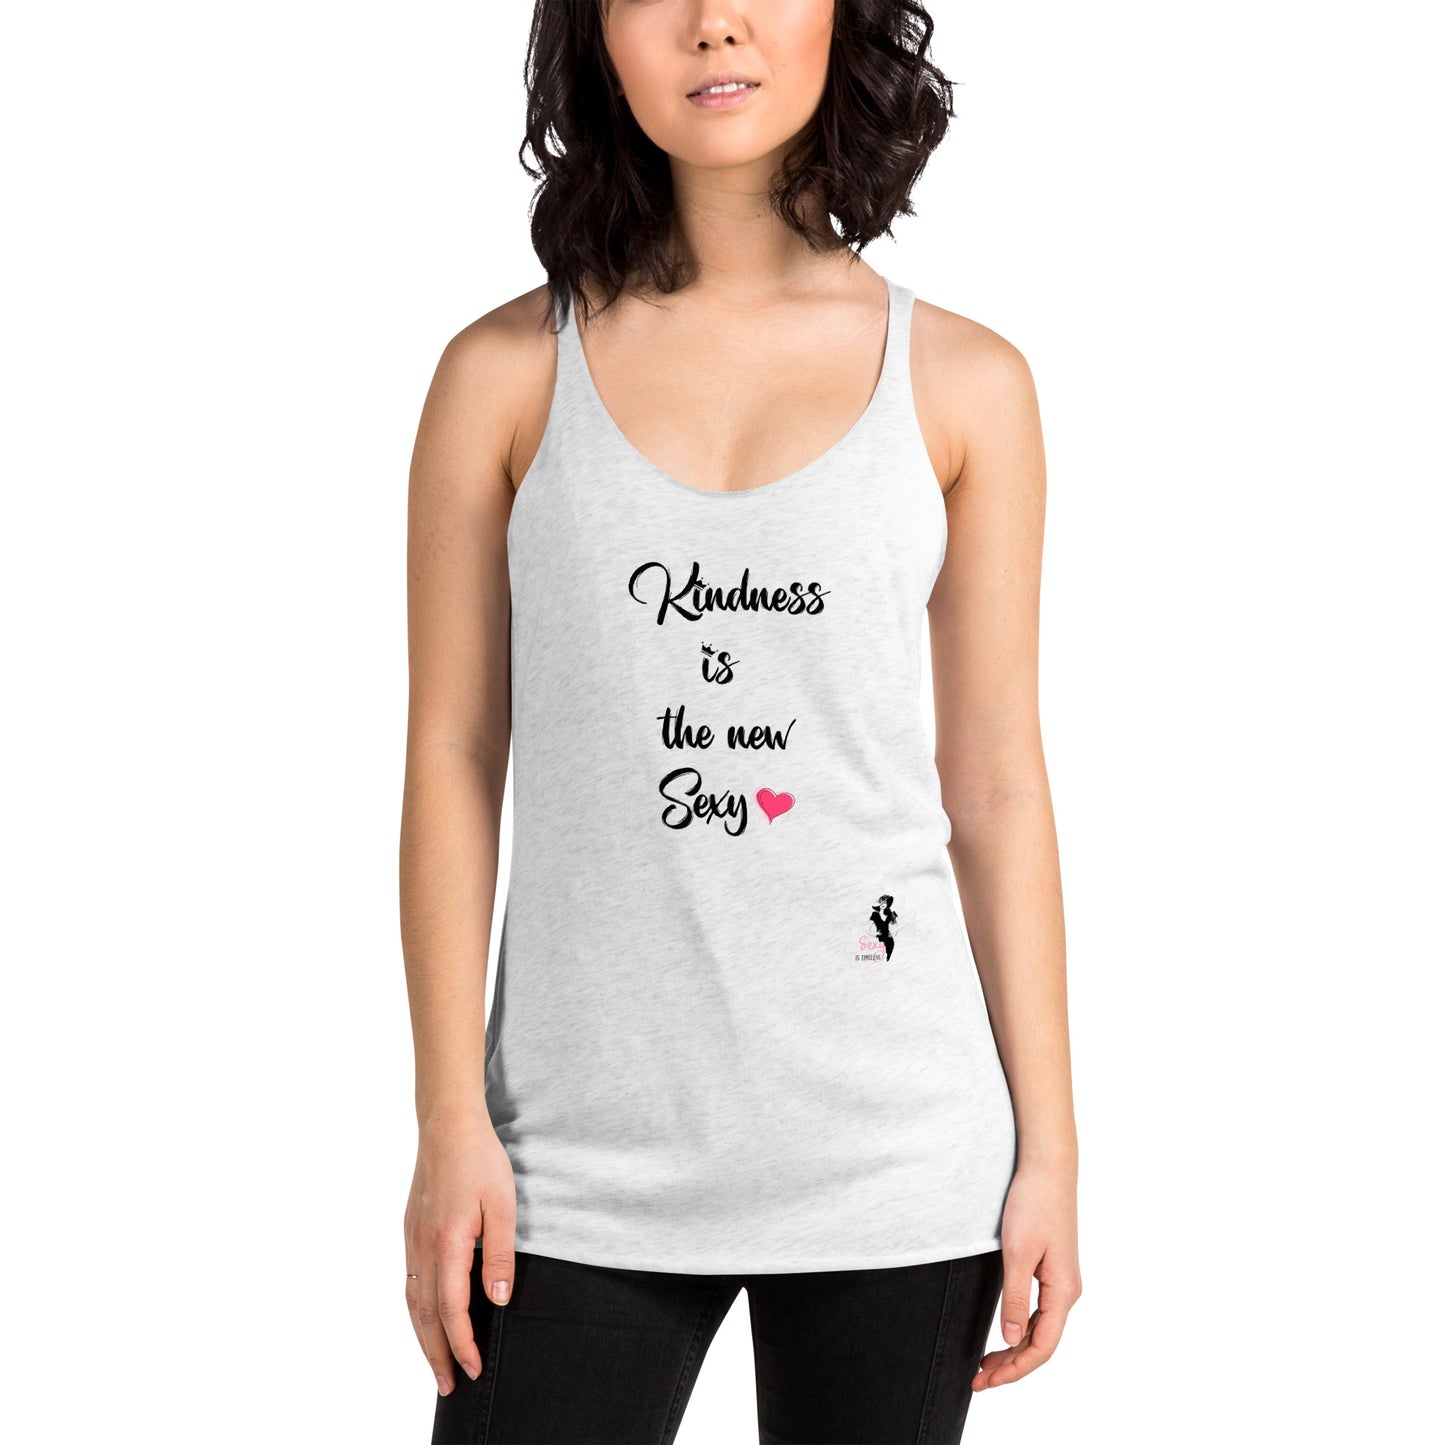 Women's Racerback Tank - Kindness is the new sexy